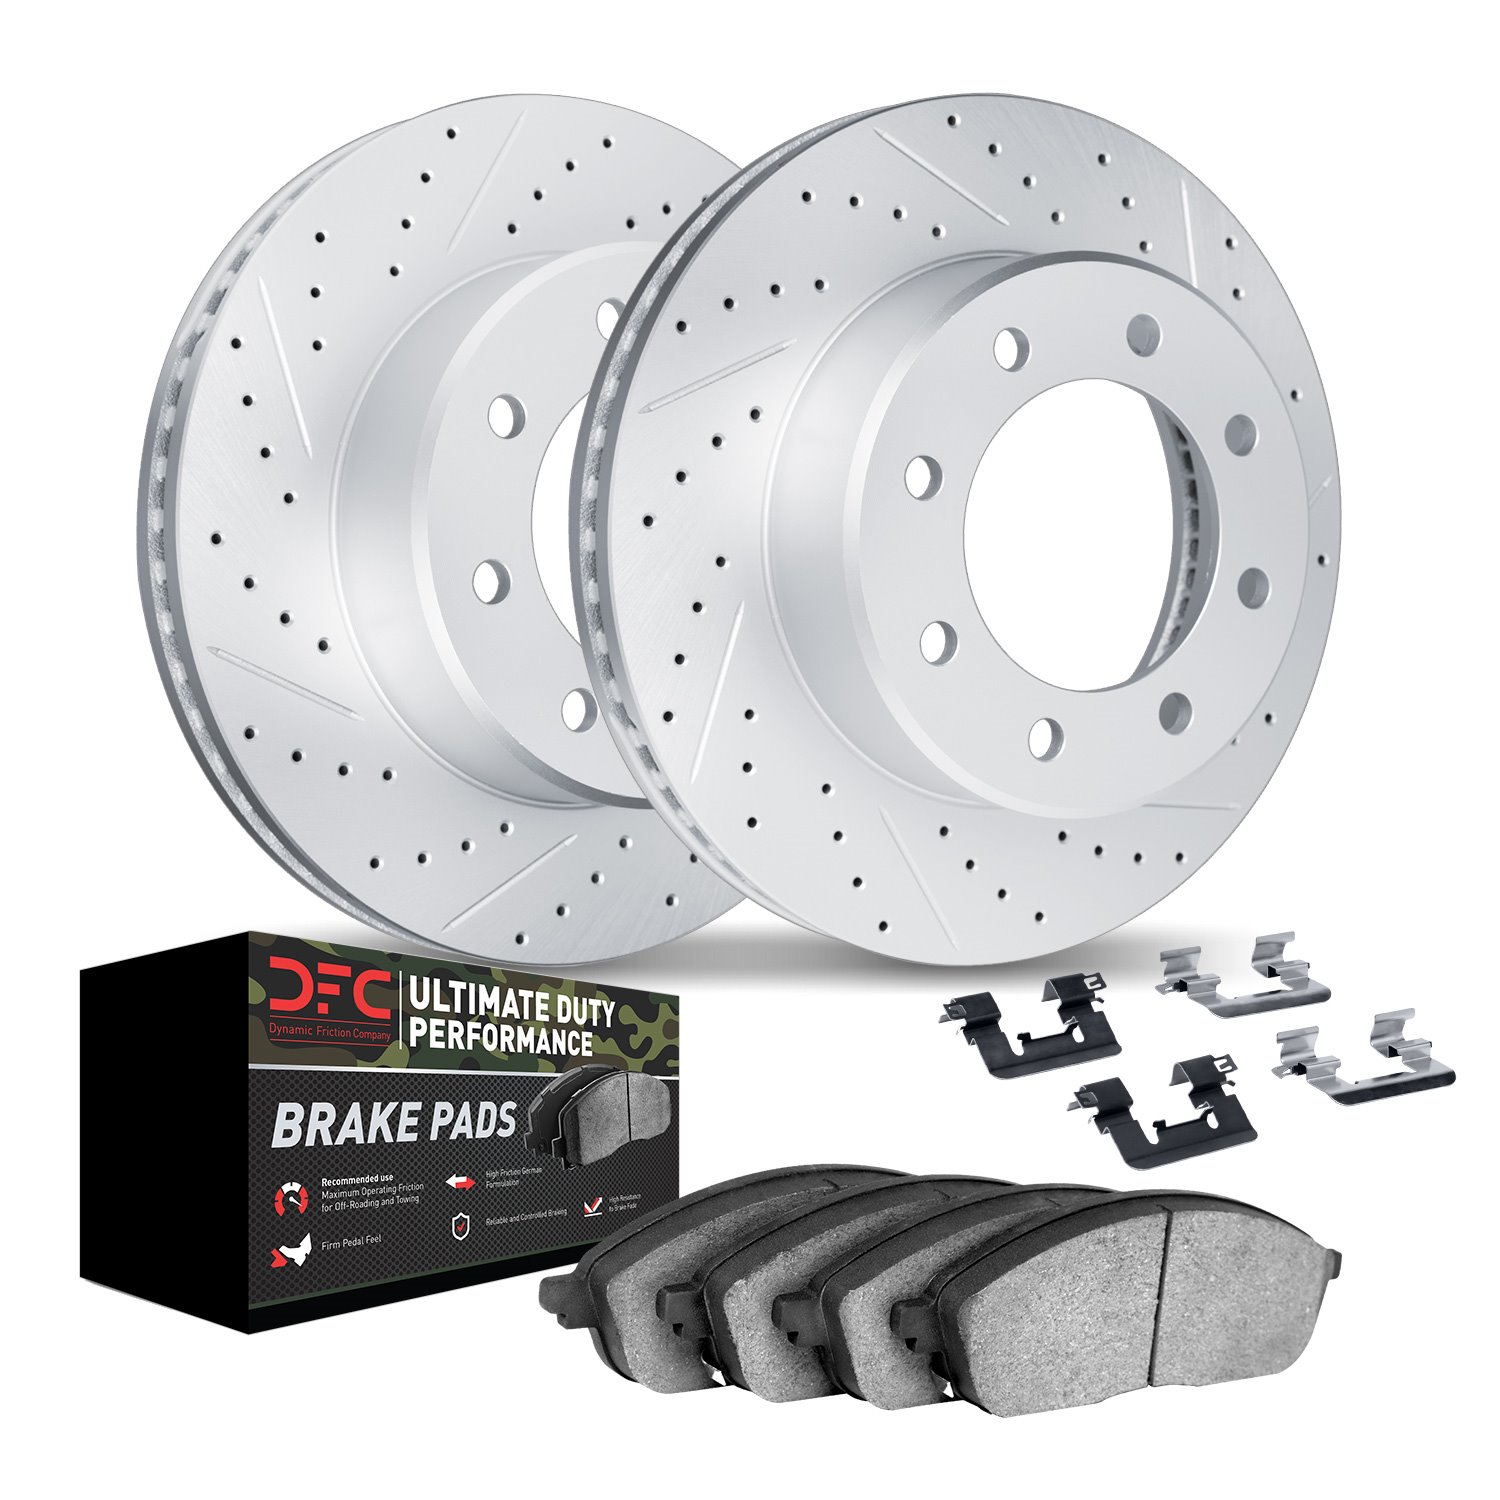 2412-54058 Geoperformance Drilled/Slotted Brake Rotors with Ultimate-Duty Brake Pads Kit & Hardware, 2010-2012 Ford/Lincoln/Merc